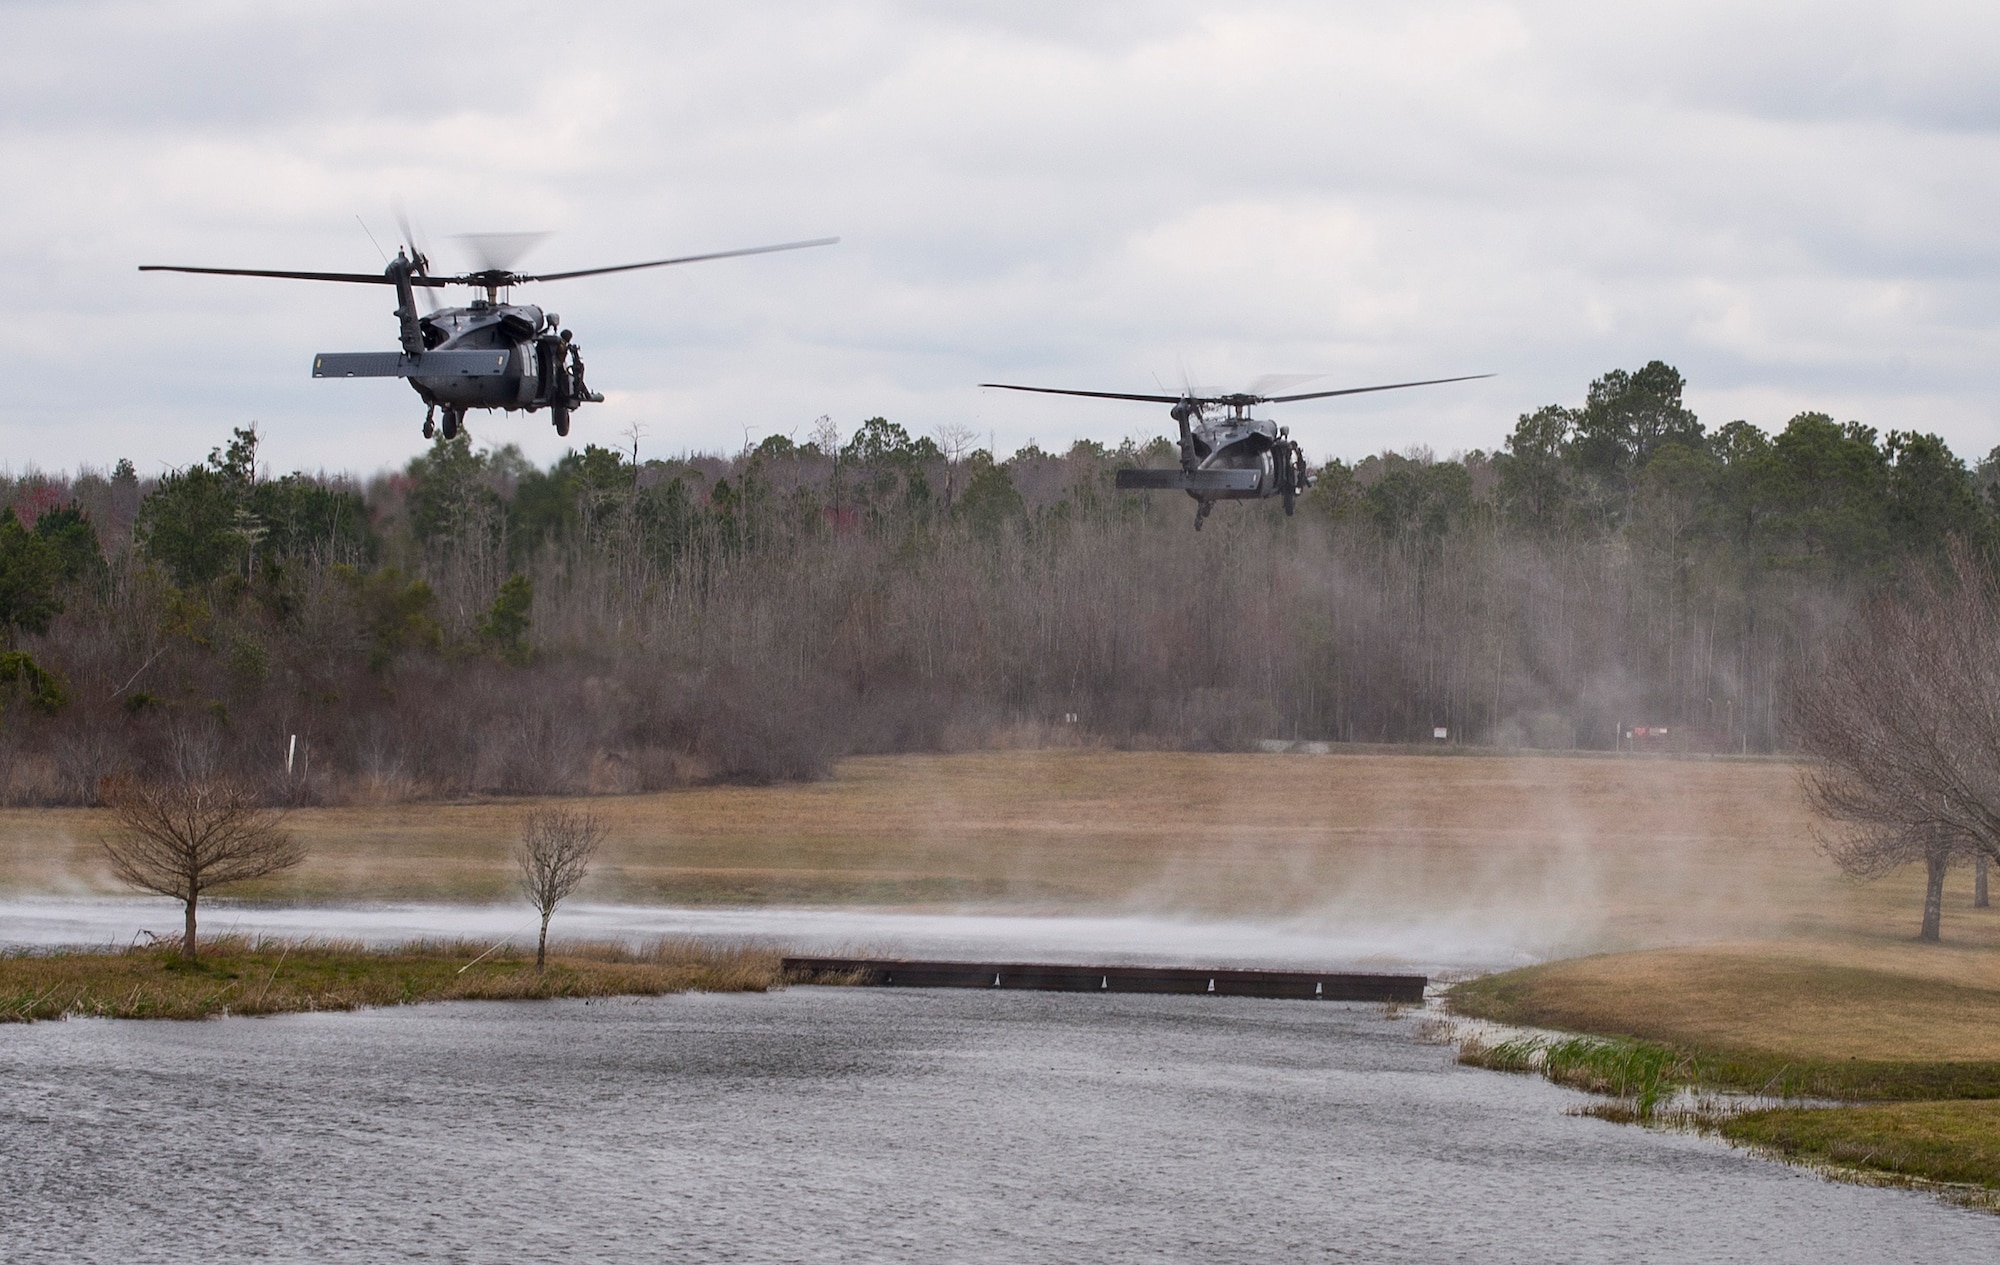 Two HH-60 Pave Hawks land at Moody Air Force Base, Ga., Mar. 4, 2016. Multiple U.S. Air Force aircraft within Air Combat Command conducted joint aerial training that showcased the aircrafts tactical air and ground maneuvers, as well as its weapons capabilities. (U.S. Air Force photo by Staff Sgt. Brian J. Valencia/Released)